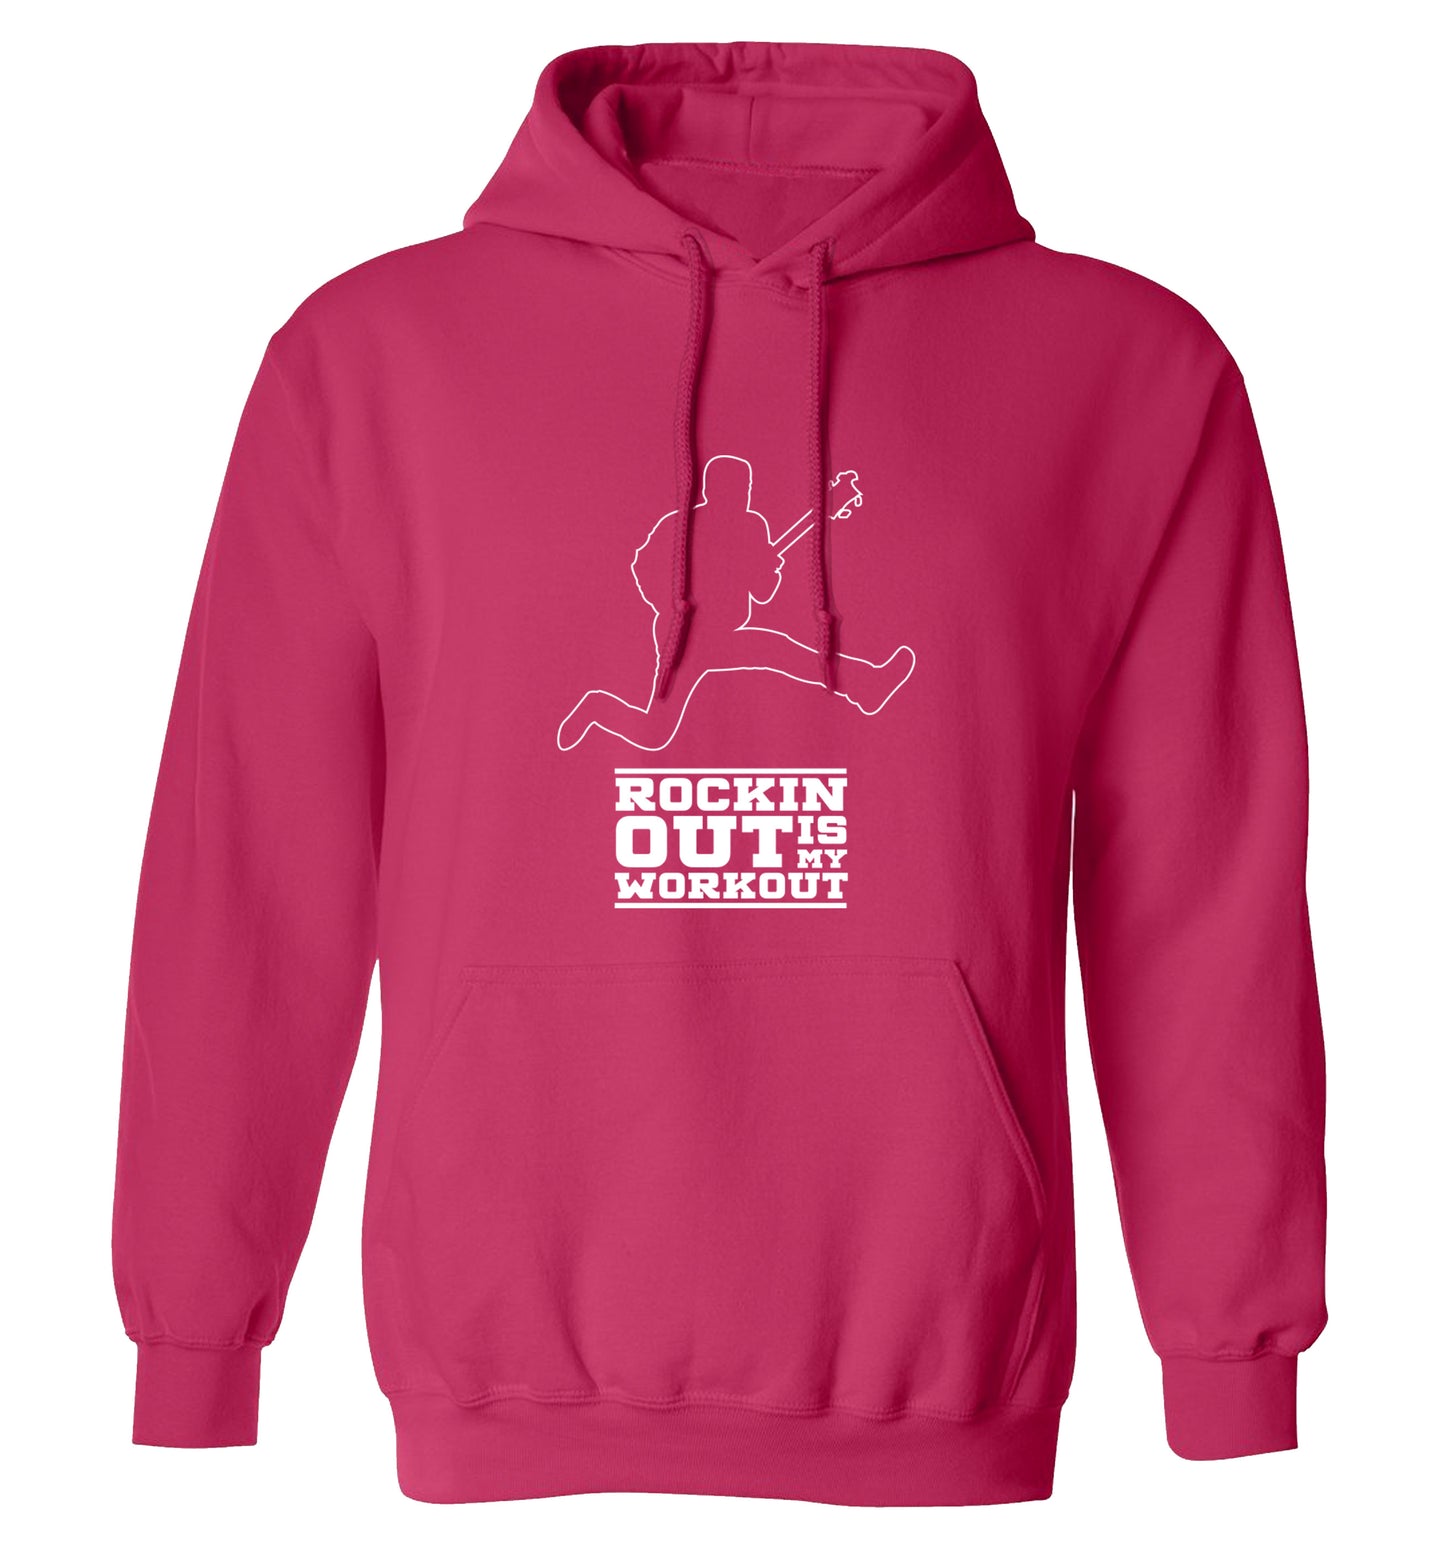 Rockin out is my workout 2 adults unisex pink hoodie 2XL